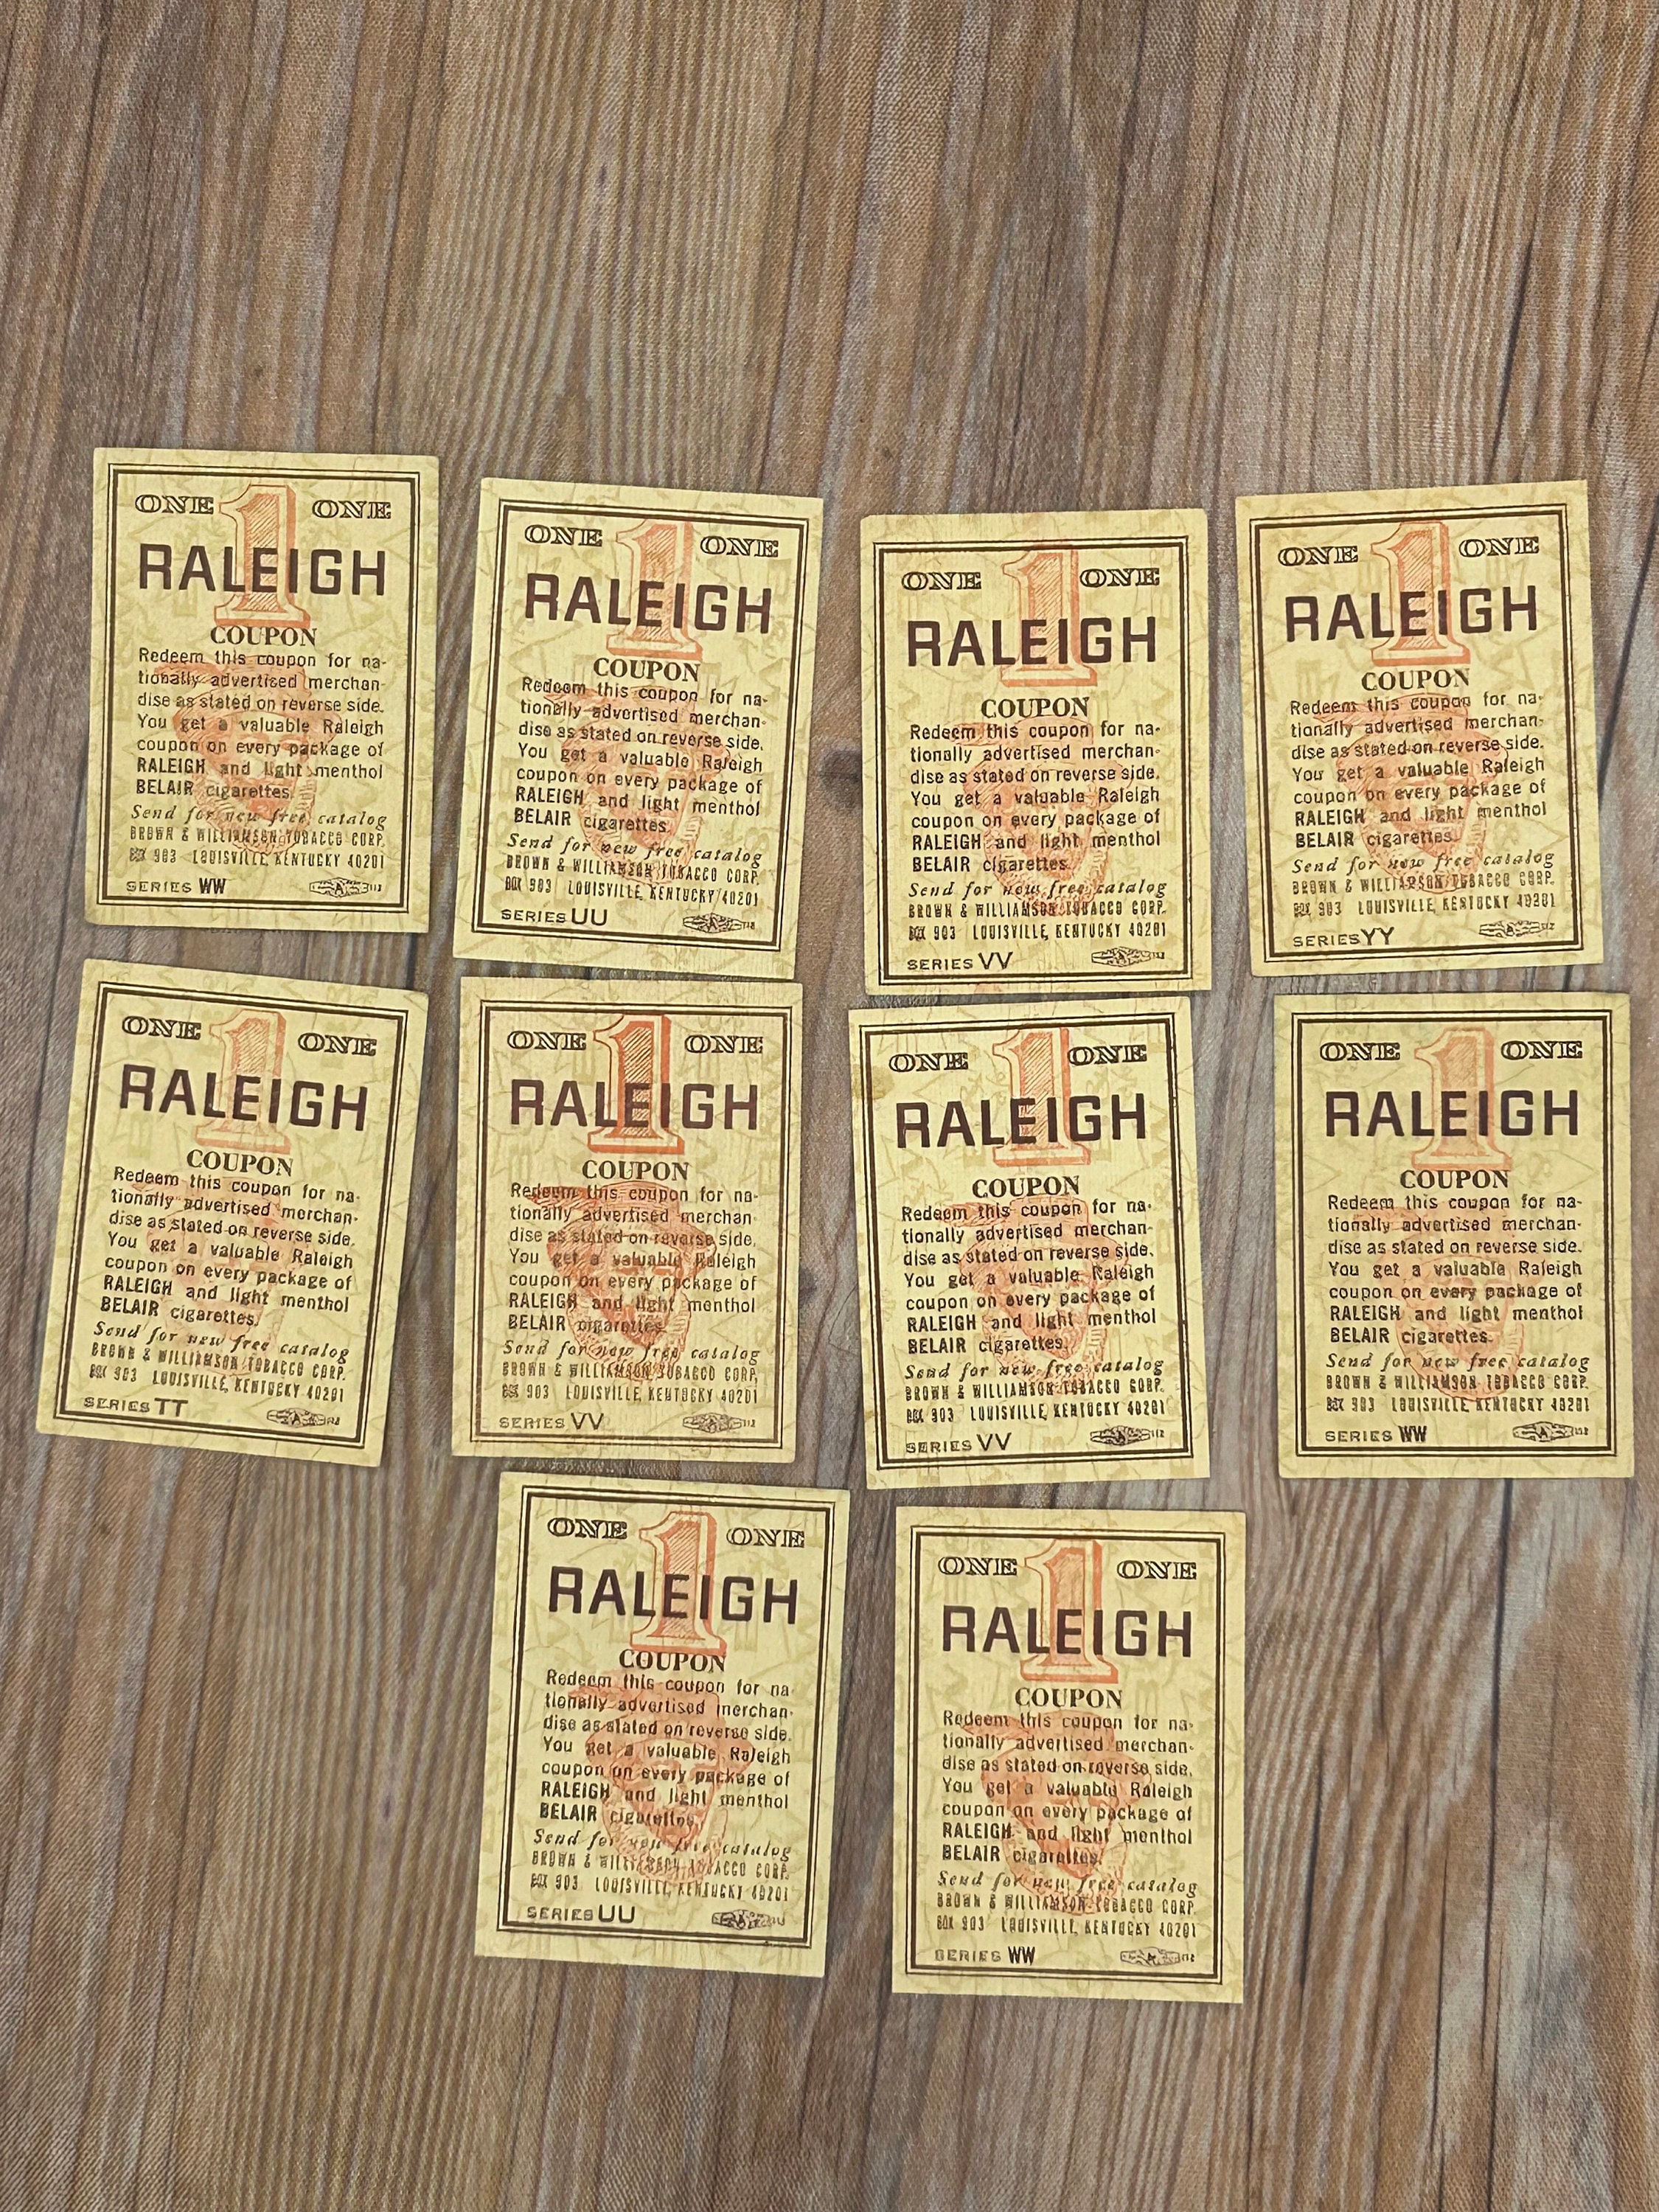 Vintage Raleigh Tobacco Pipe Cleaners and 1956 Coupon Book 